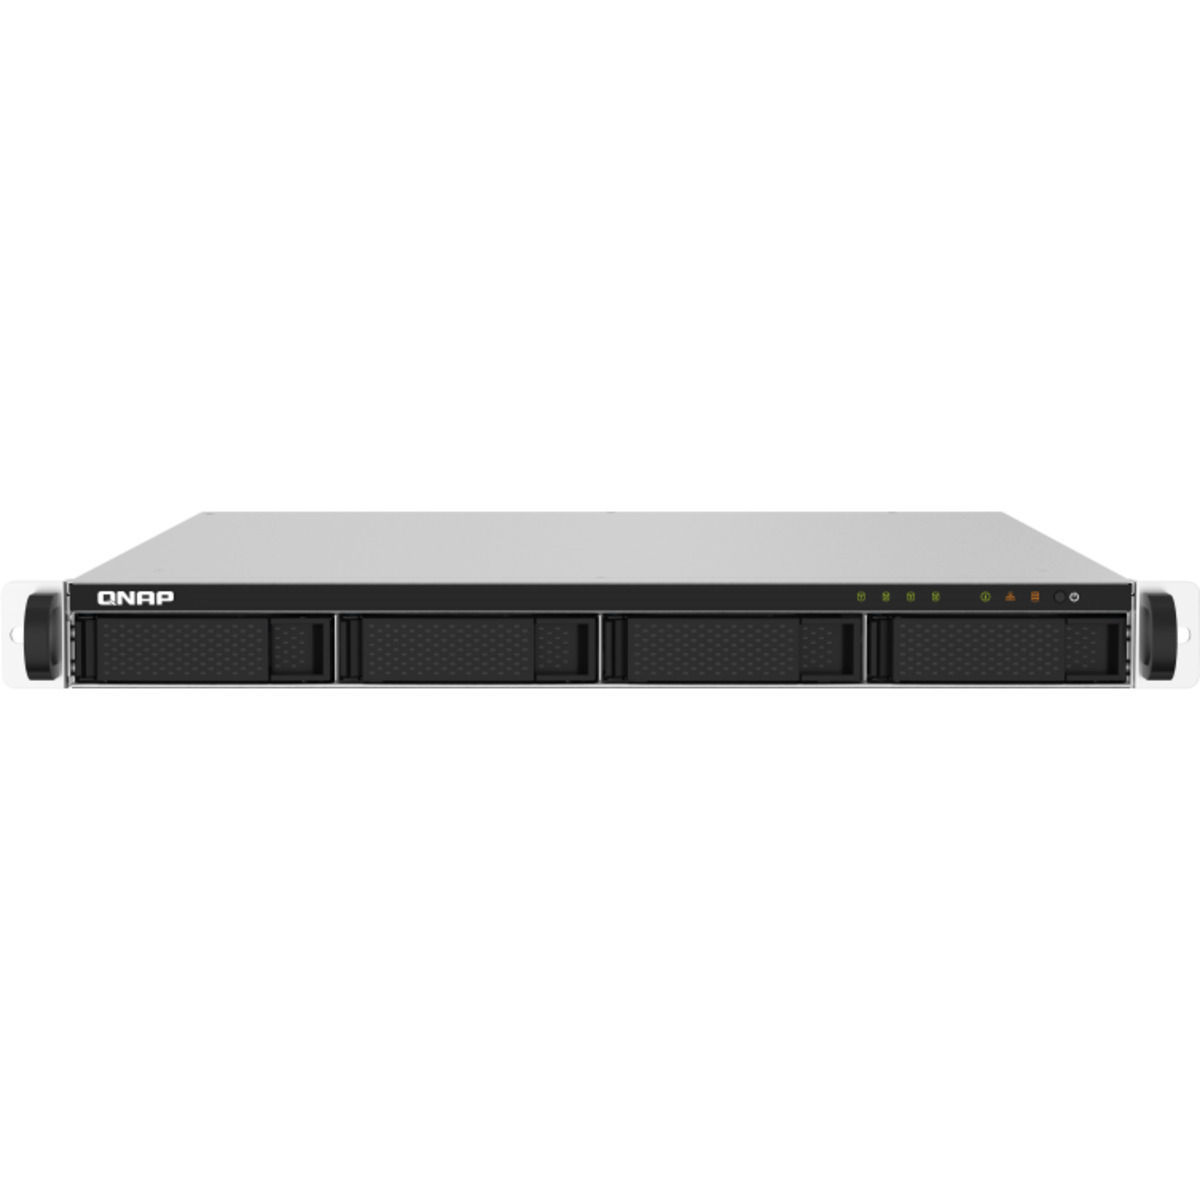 buy $1701 QNAP TS-432PXU-RP 32tb RackMount NAS - Network Attached Storage Device 4x8000gb Toshiba Enterprise Capacity MG08ADA800E 3.5 7200rpm SATA 6Gb/s HDD ENTERPRISE Class Drives Installed - Burn-In Tested - ON SALE - FREE RAM UPGRADE - nas headquarters buy network attached storage server device das new raid-5 free shipping usa TS-432PXU-RP